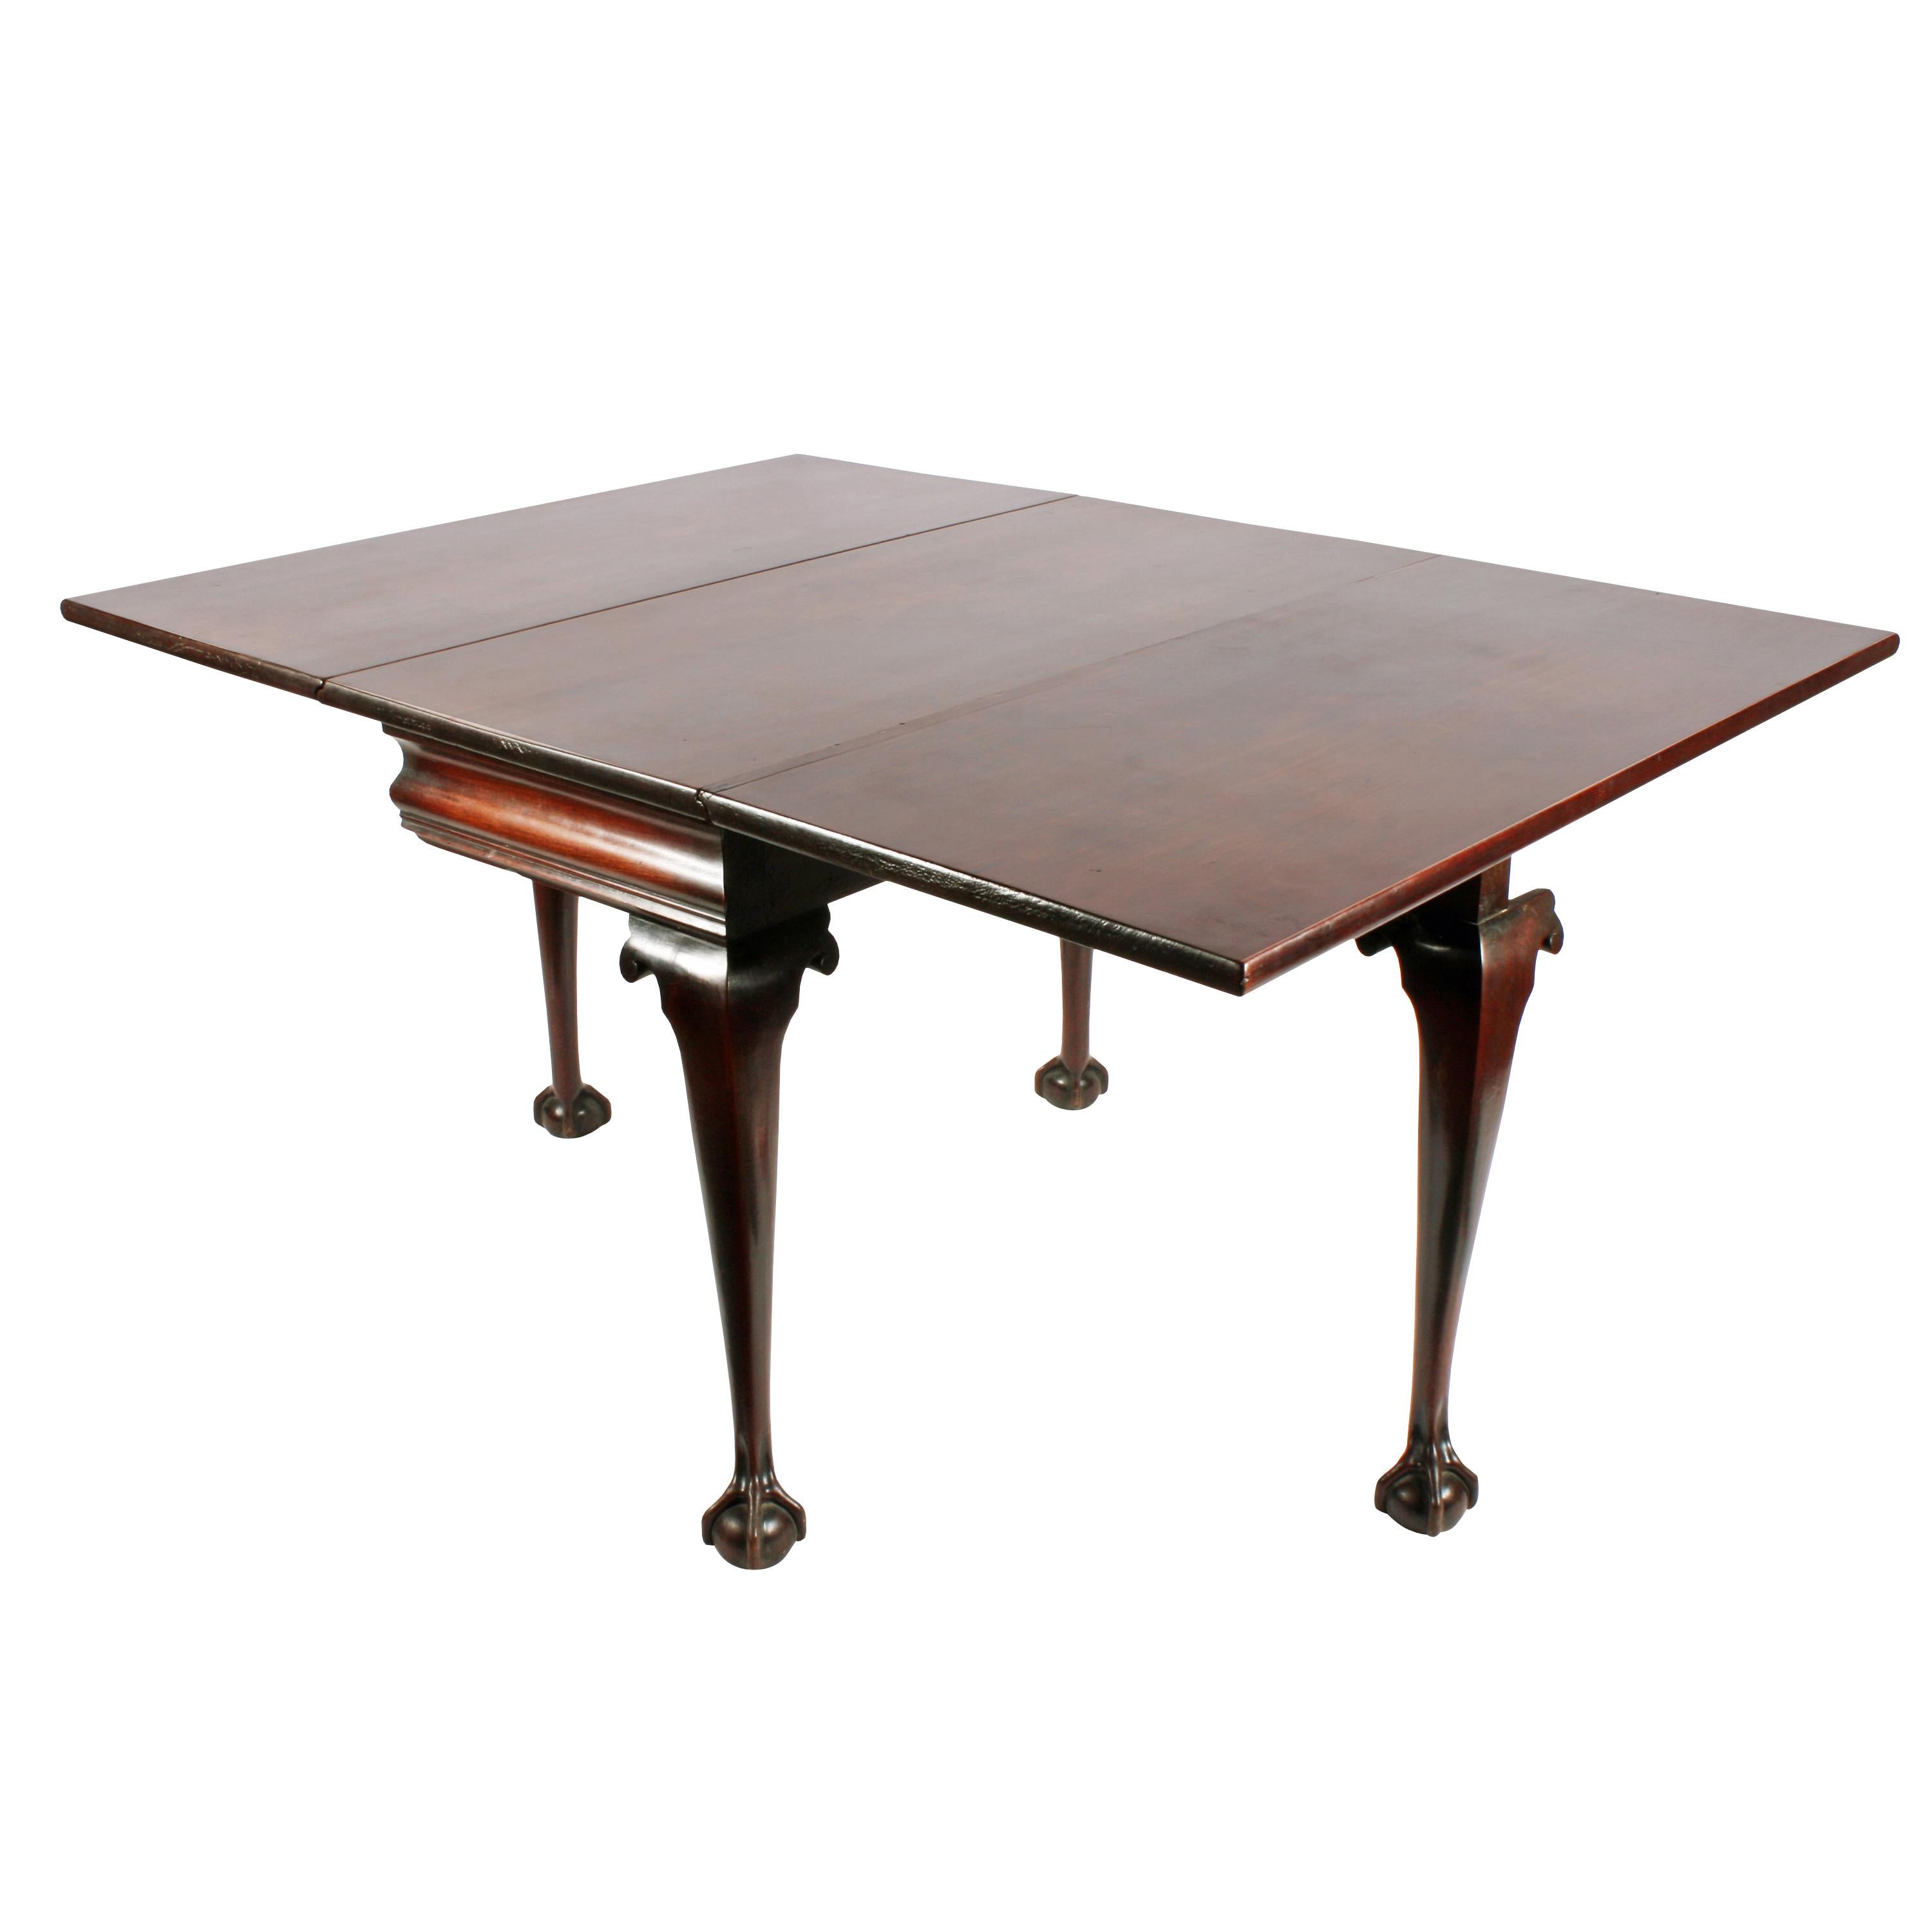 18th century George II walnut drop-leaf table


A mid-18th century George II Walnut oblong drop leaf dining table.

This table is very good quality and original color, has a solid walnut top with a rounded edge and a gated leg at each side to